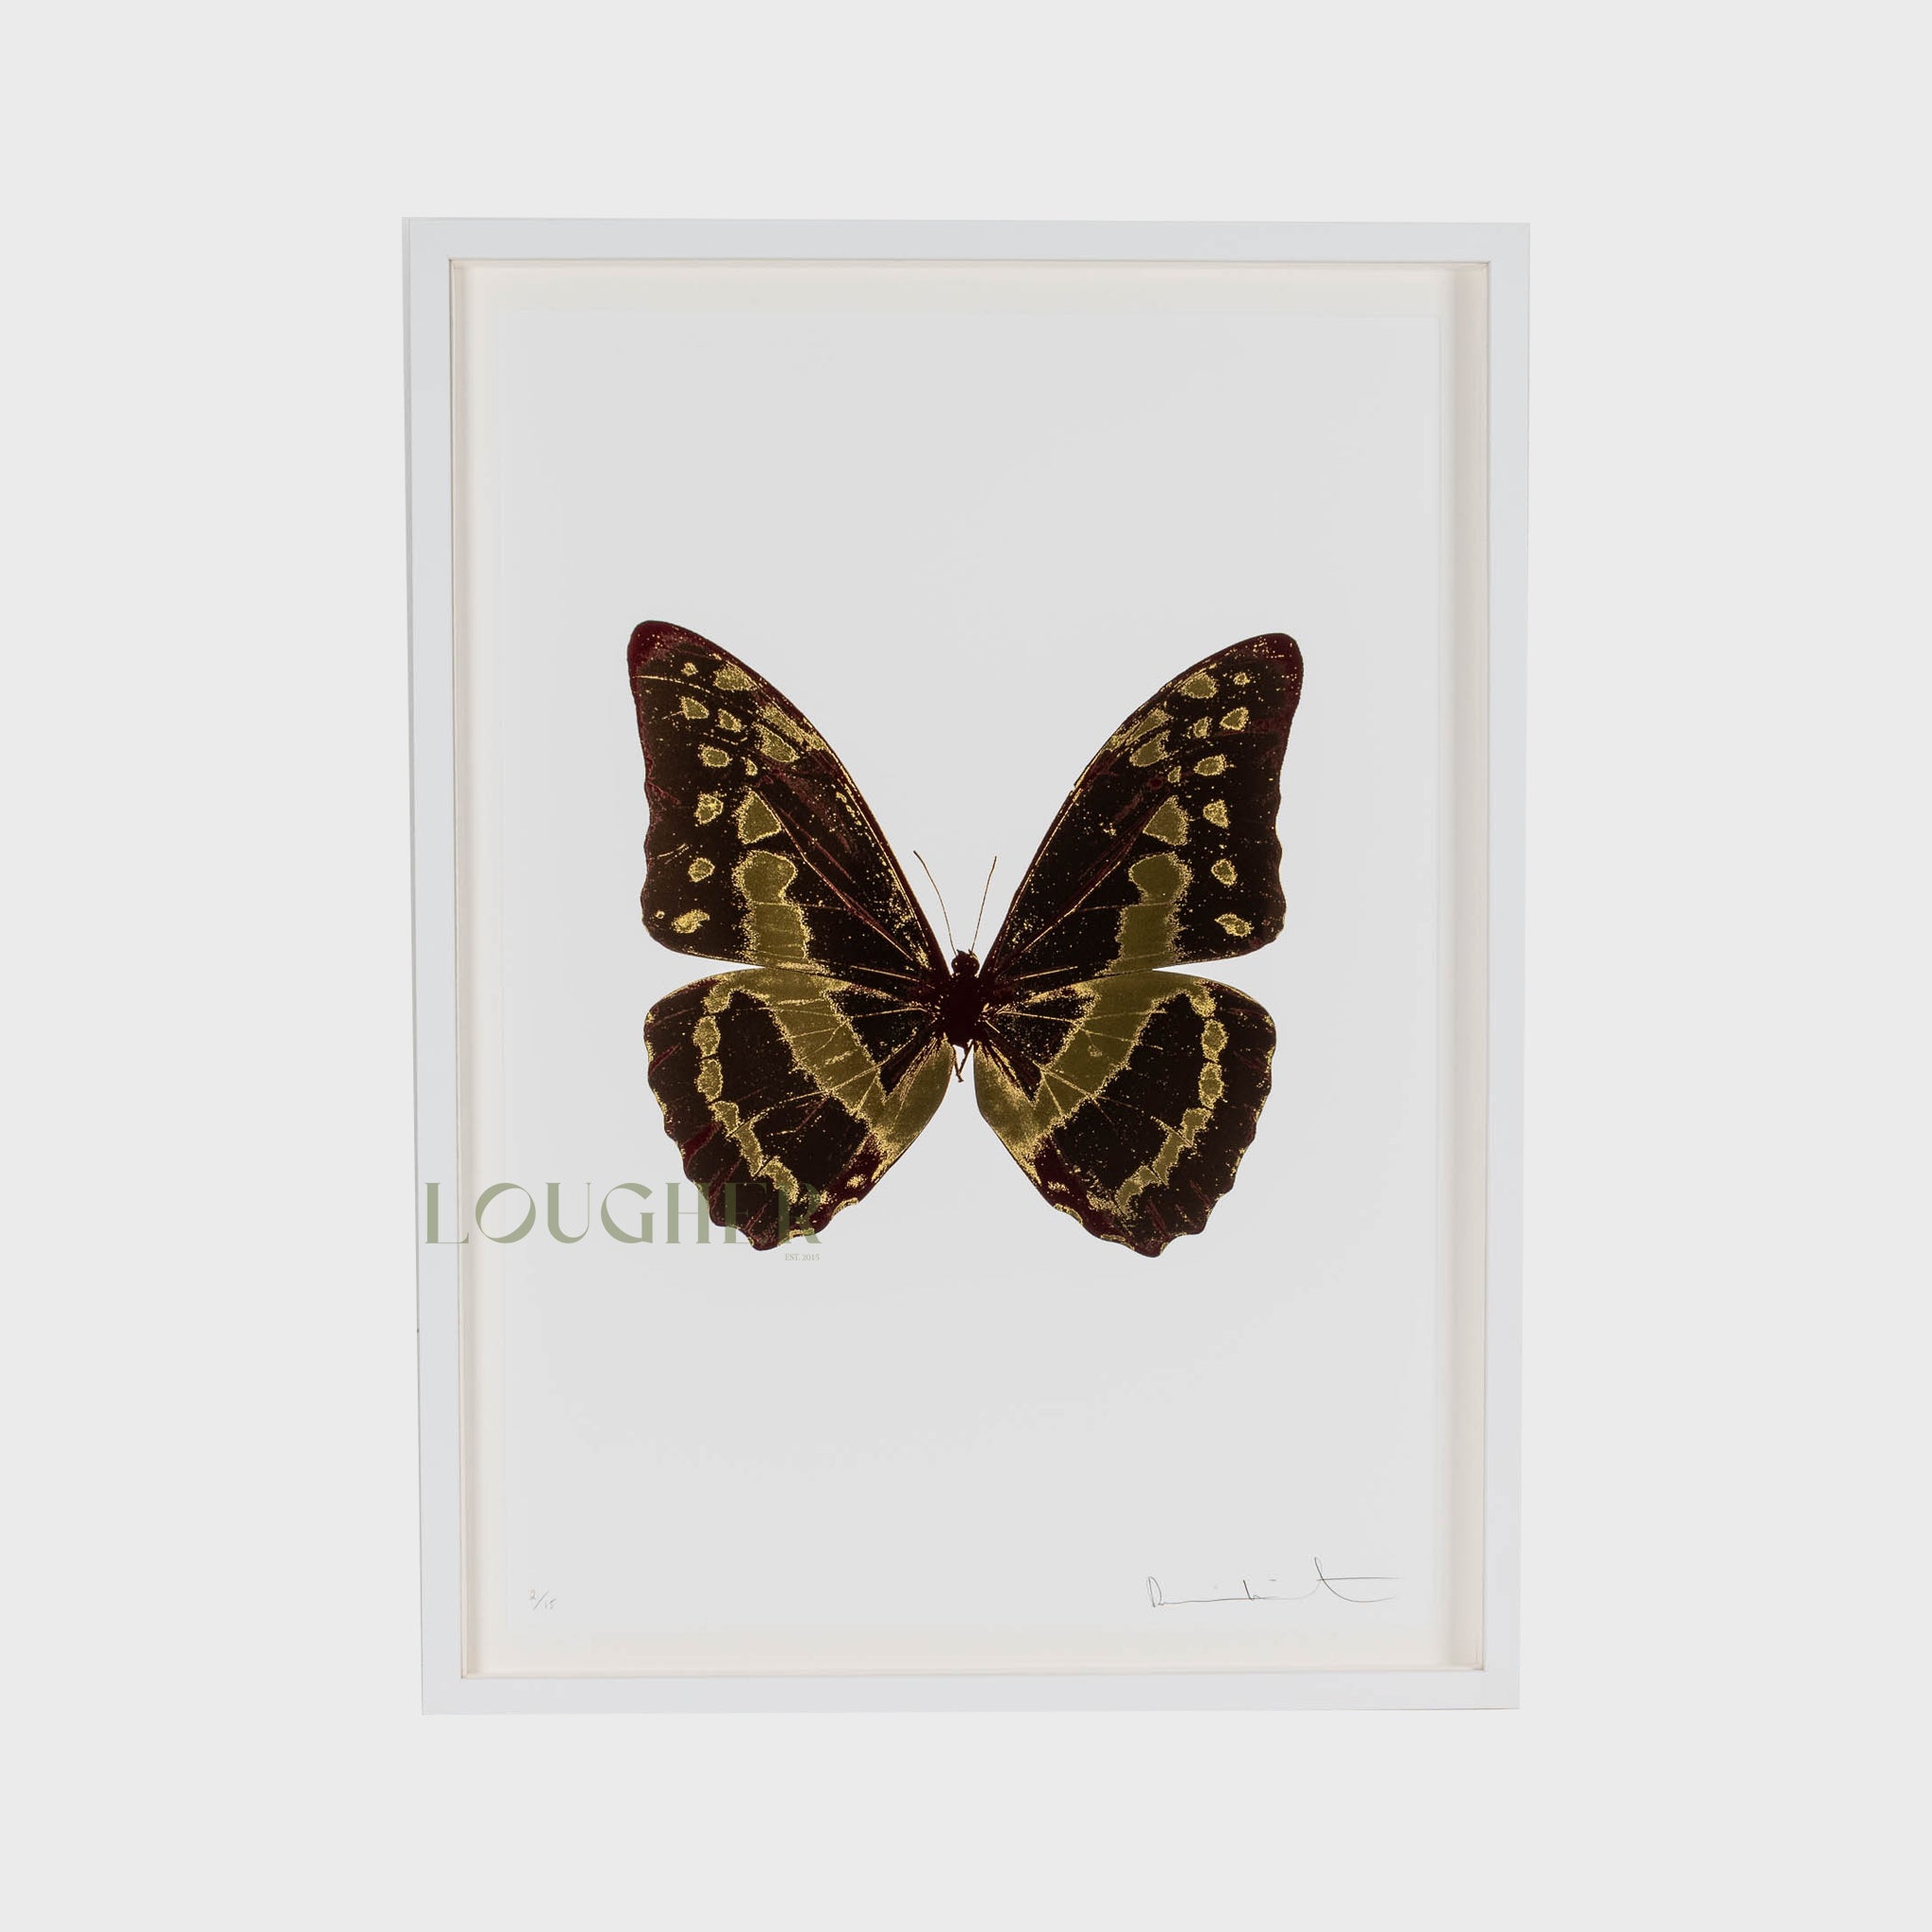 Damien Hirst, The Souls III - Chocolate/Oriental Gold/Burgundy, 2010 For Sale | Lougher Contemporary 